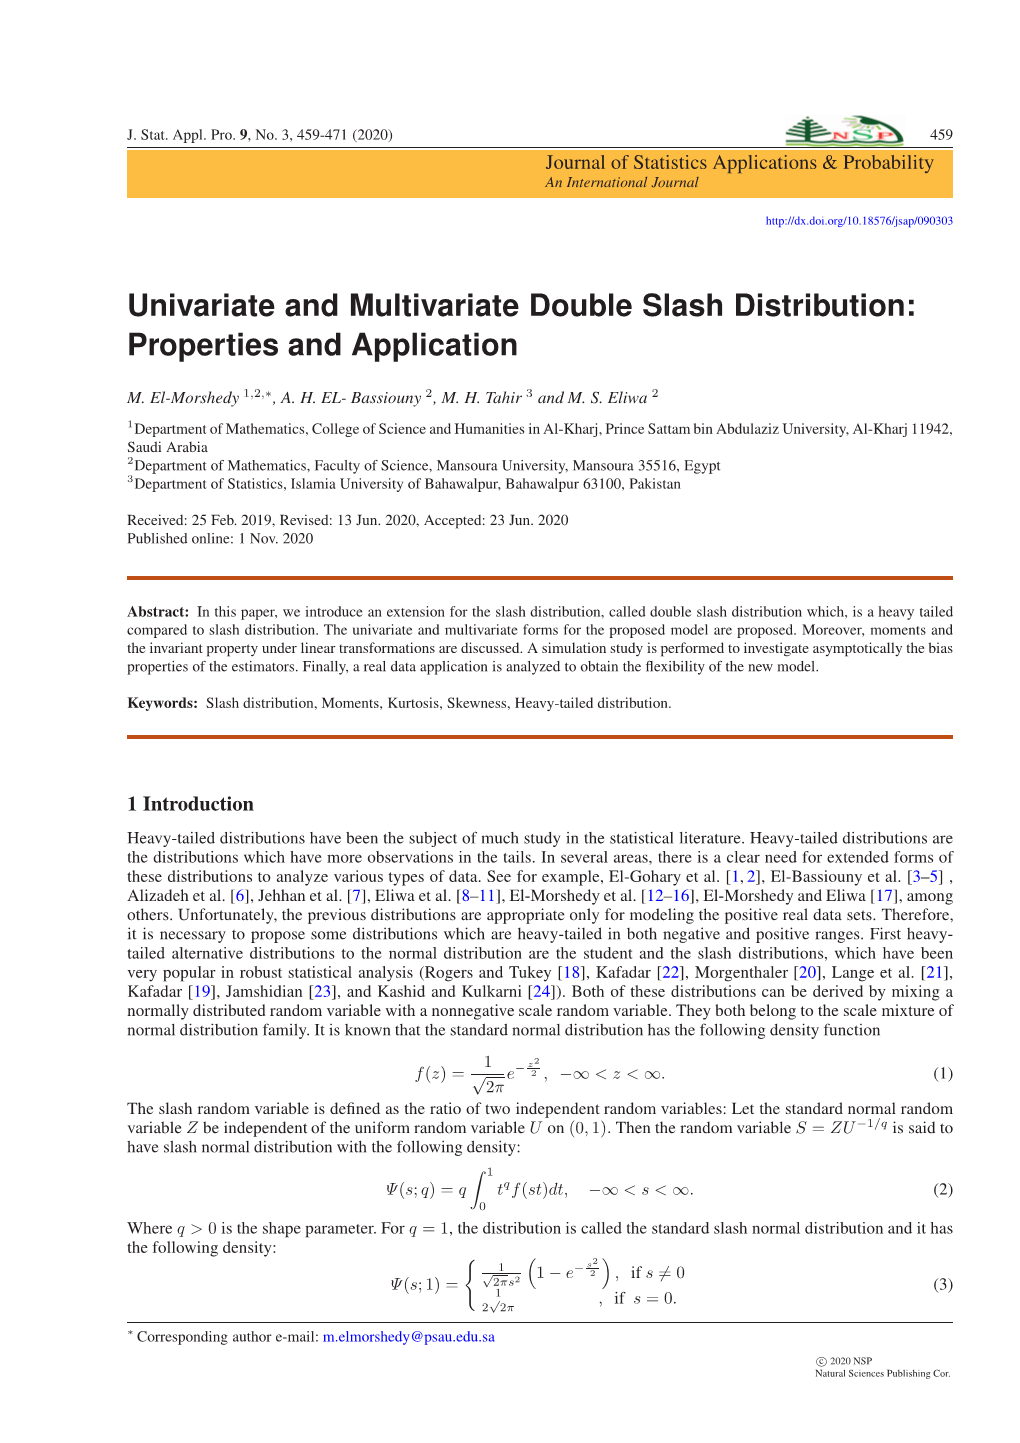 Univariate and Multivariate Double Slash Distribution: Properties and Application